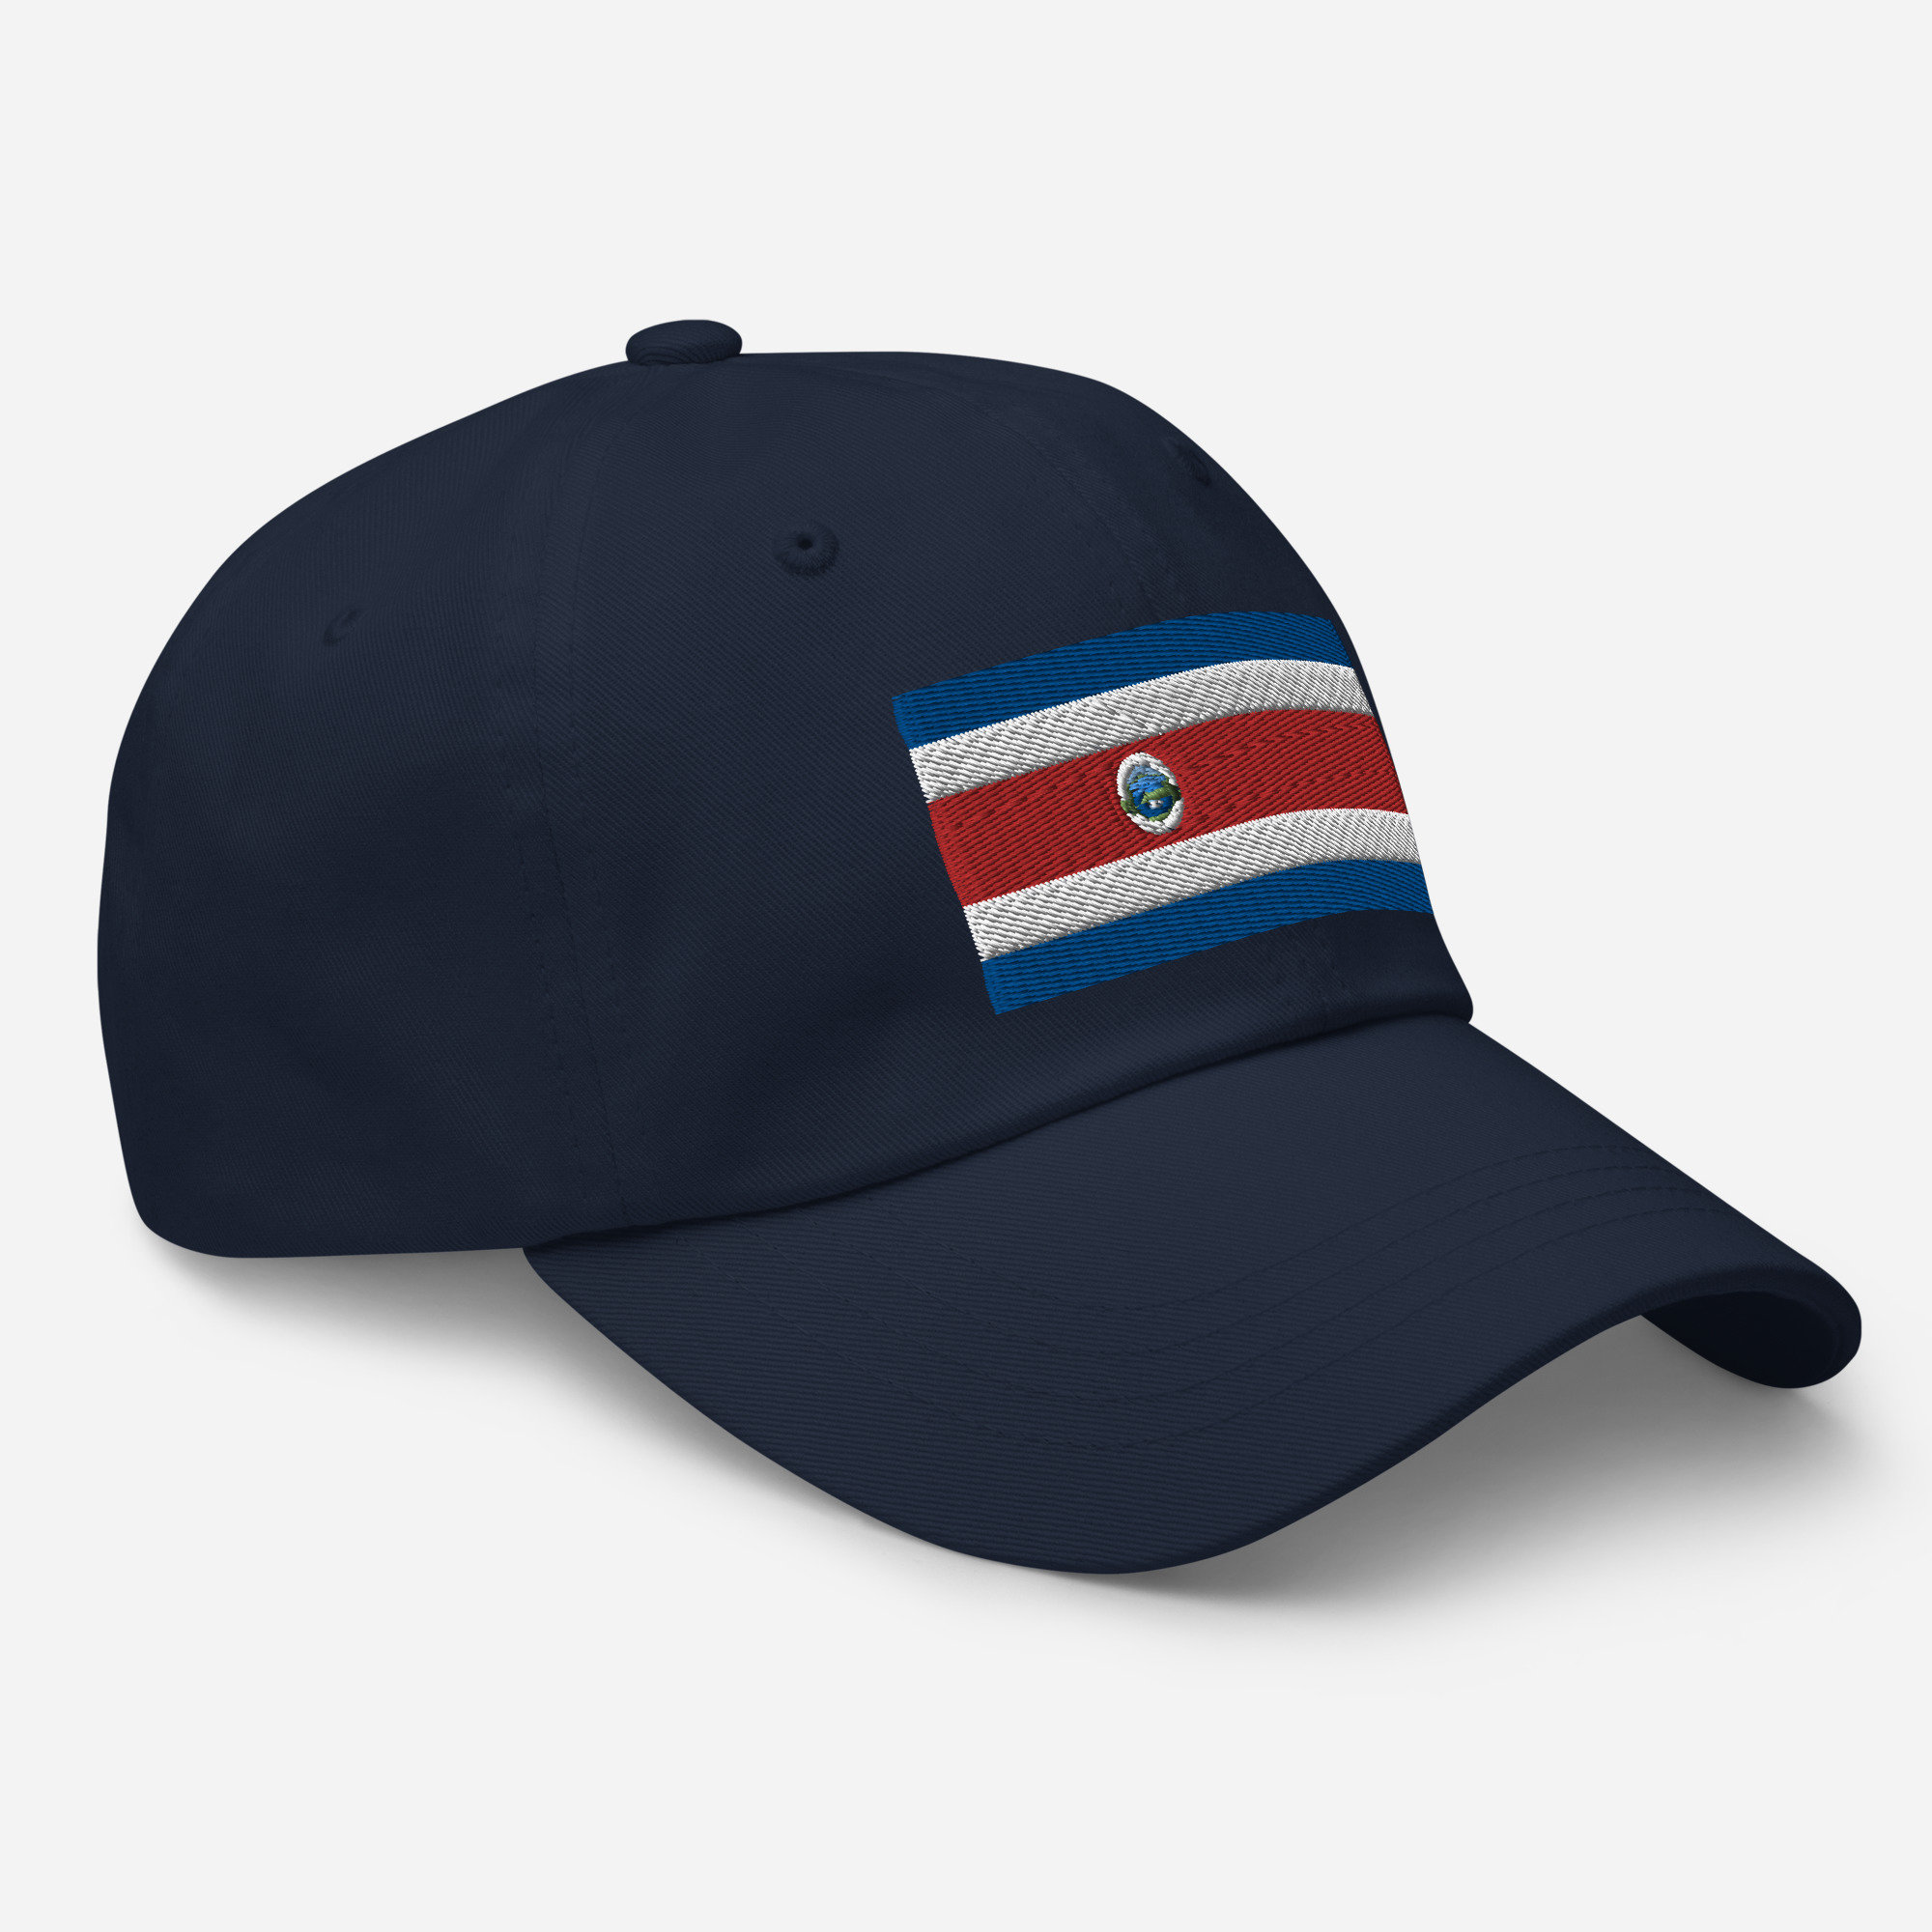 Costa Rica Hat, Costa Rican Flag Embroidered Cap, Costa Rica Gifts